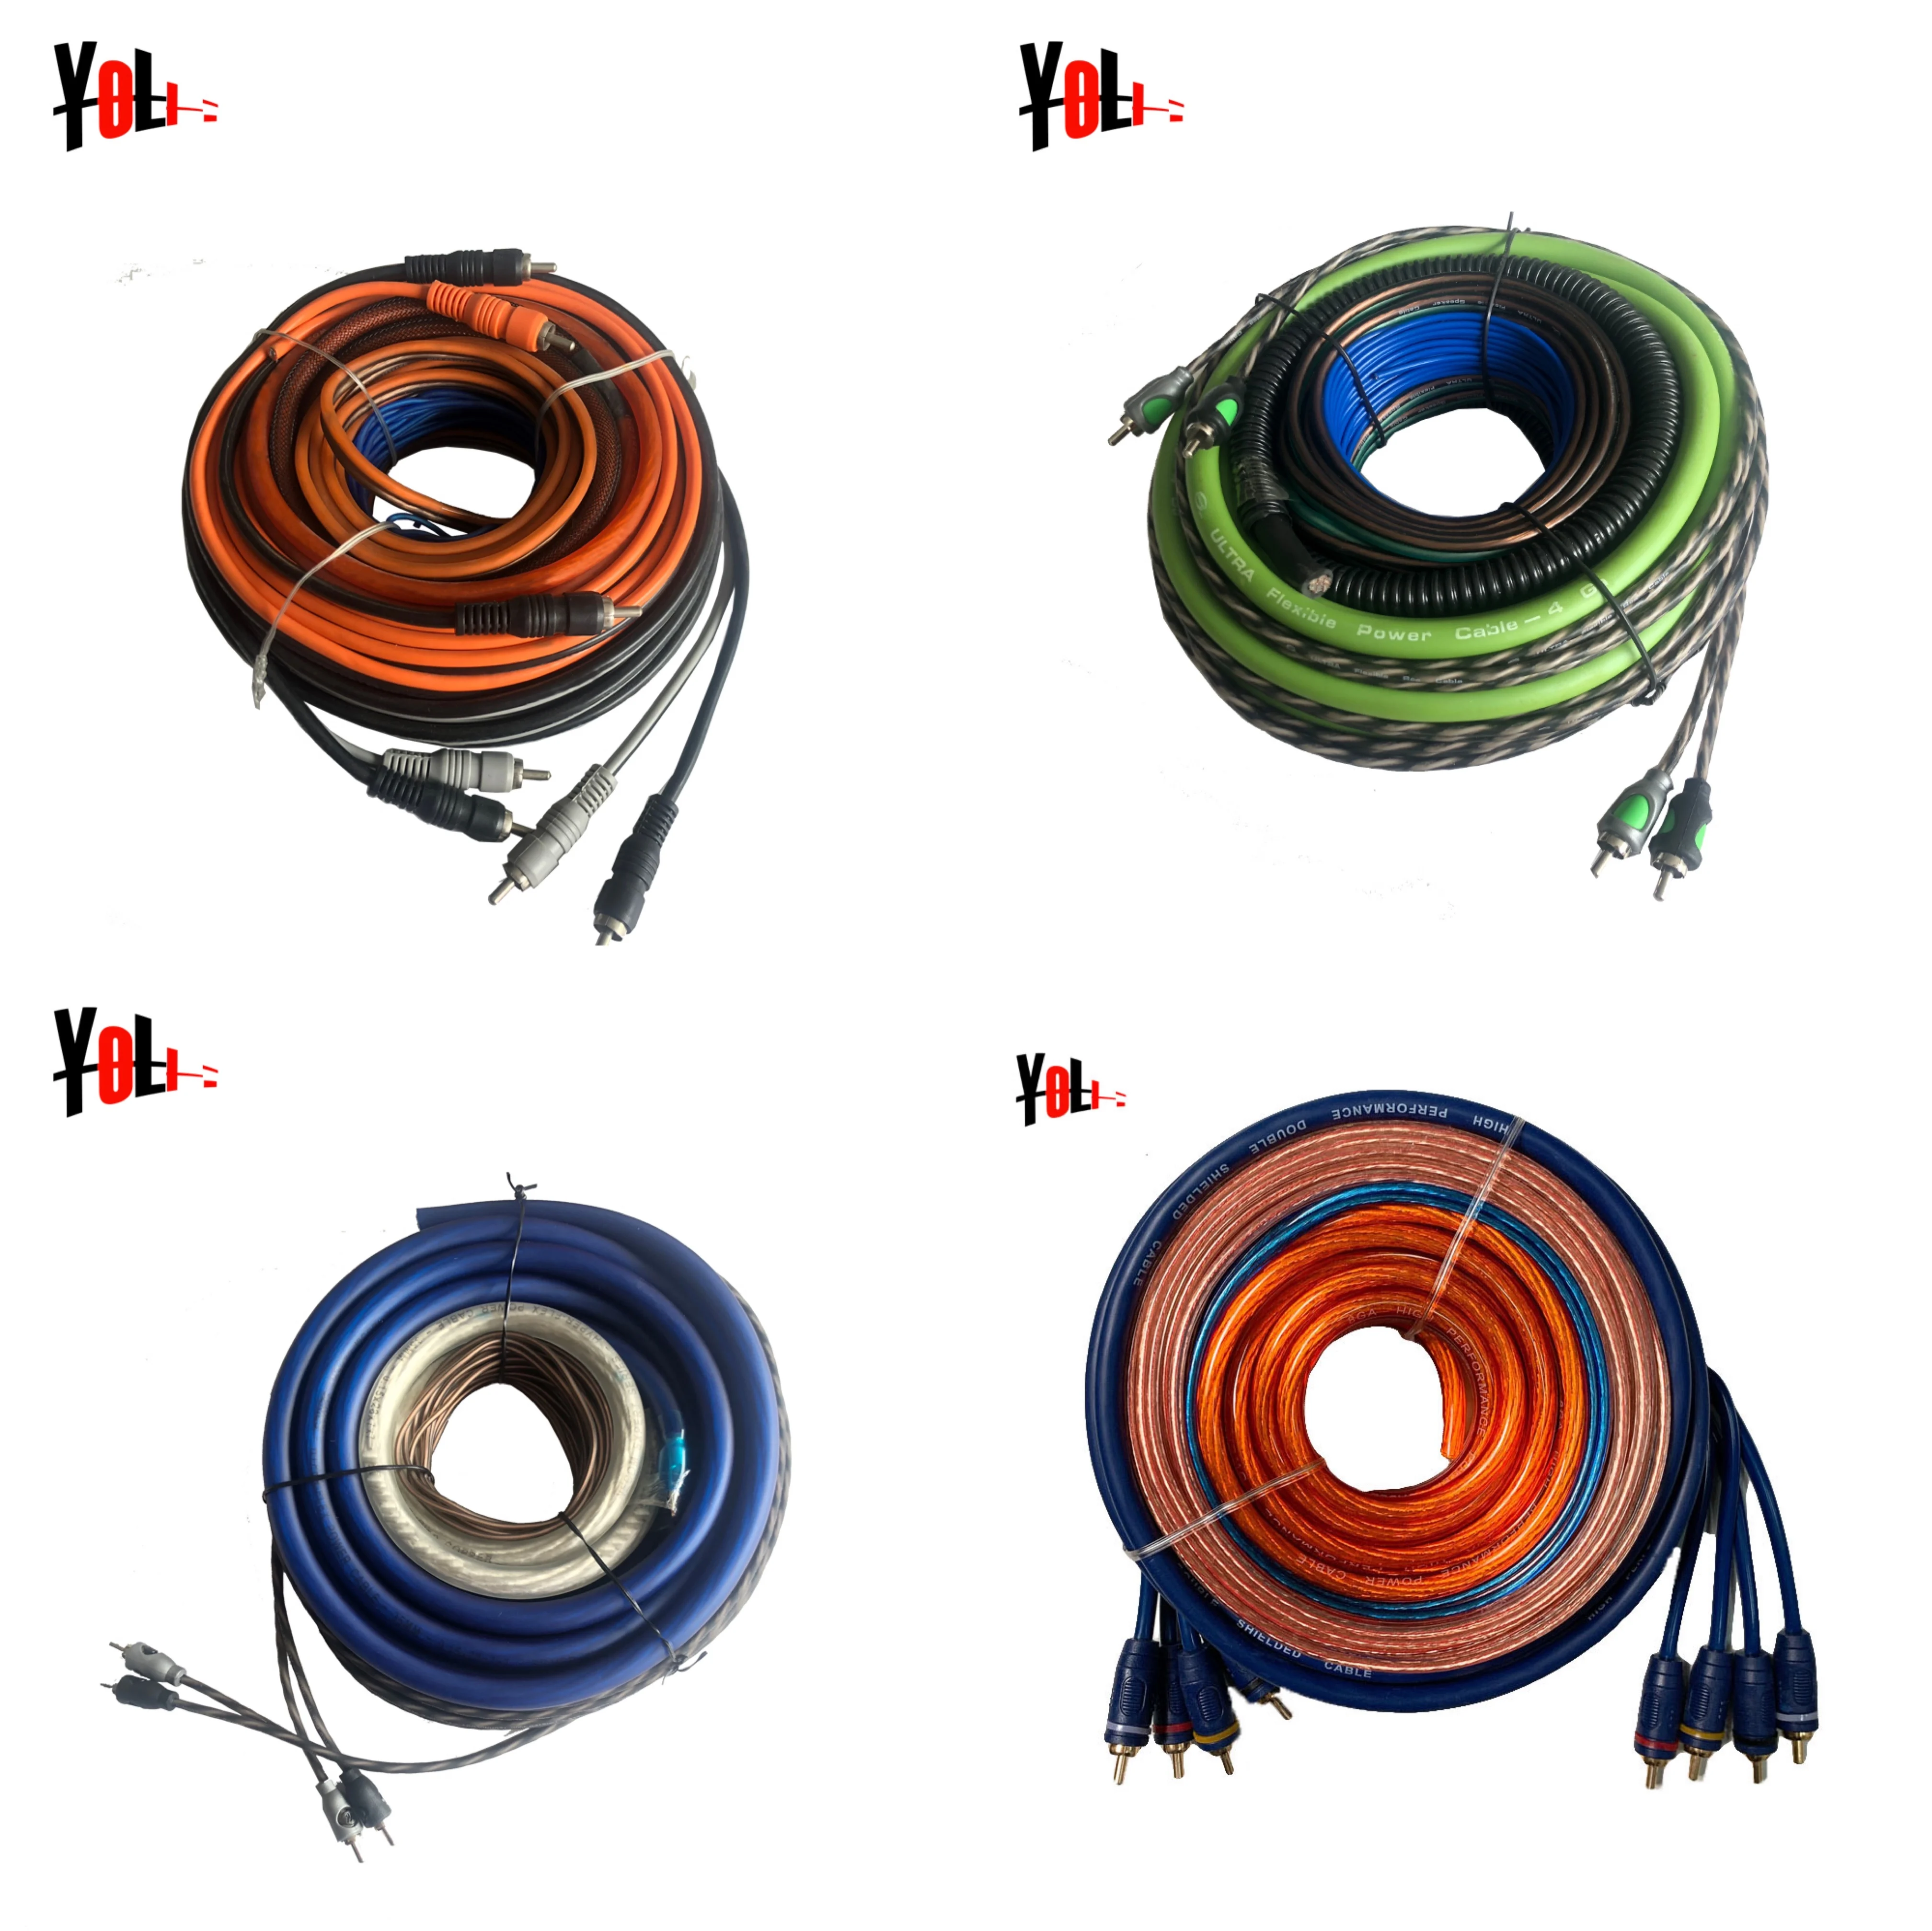 Popular 3000 watt 4 AWG amp wiring kits with colorful cable amp wiring kit in stone